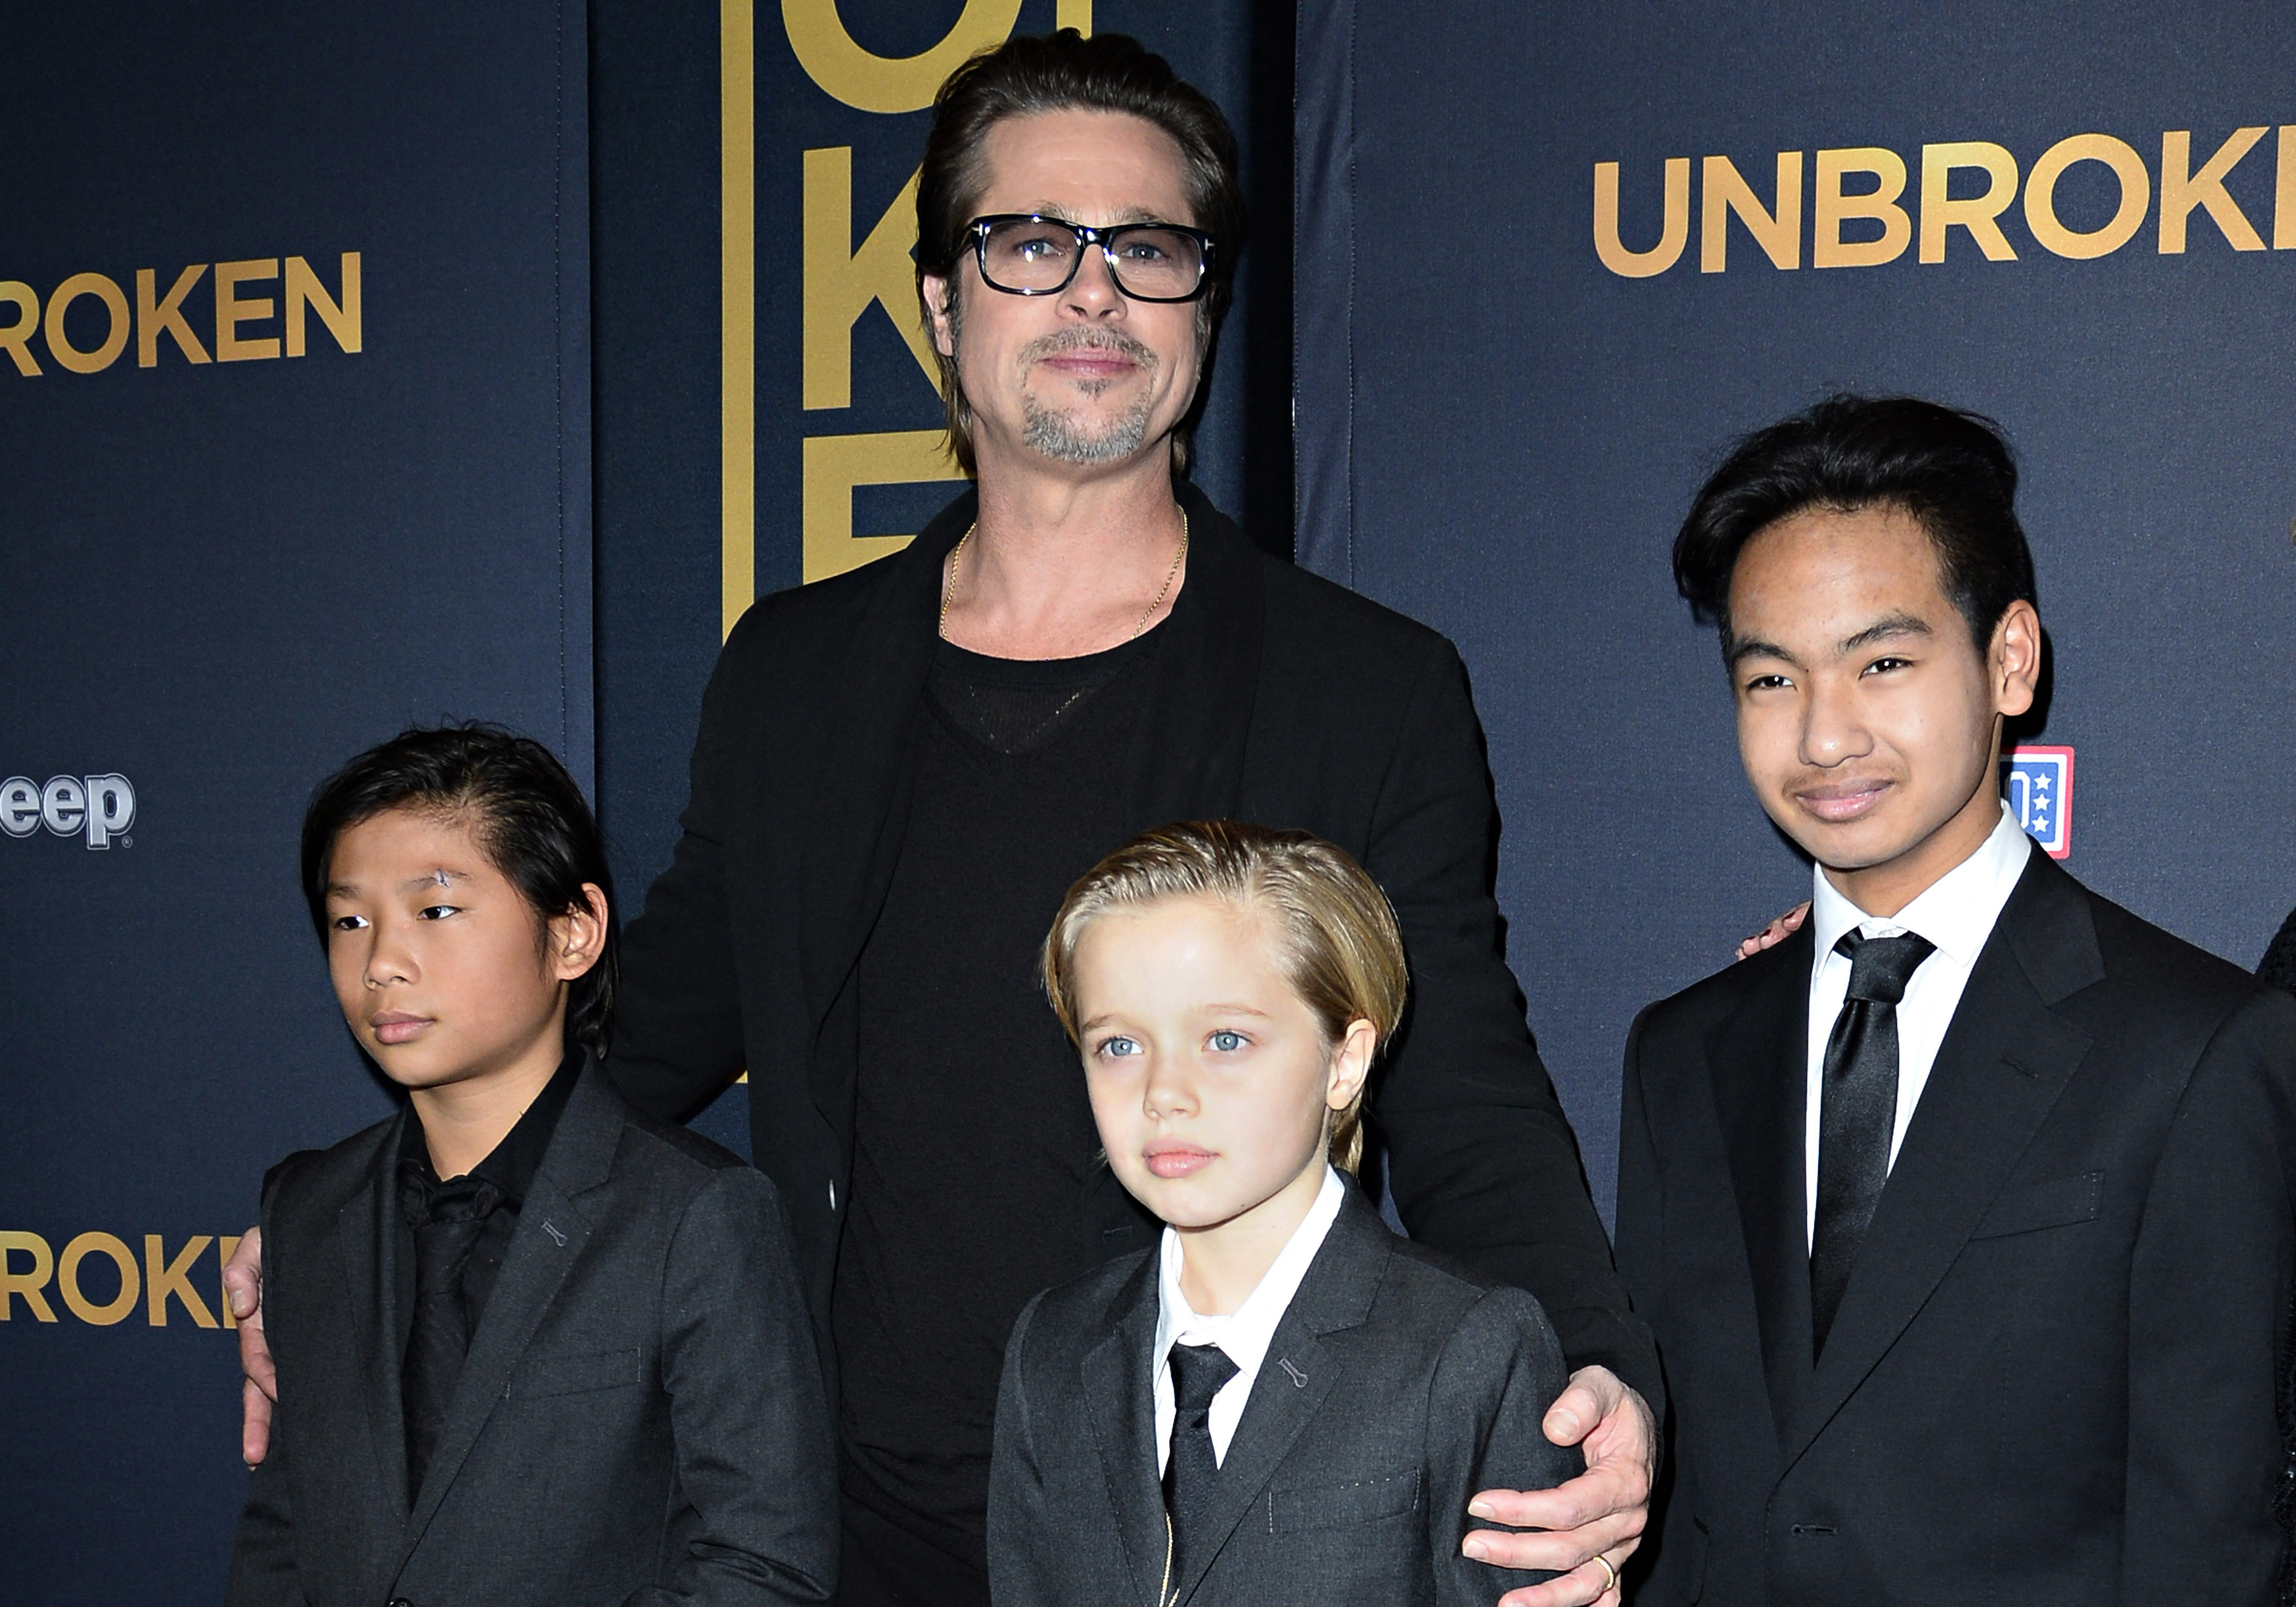 Brad Pitt with his children children Pax, Shiloh, and Maddox at the premiere of "Unbroken," in Los Angeles in 2014 | Source: Getty Images